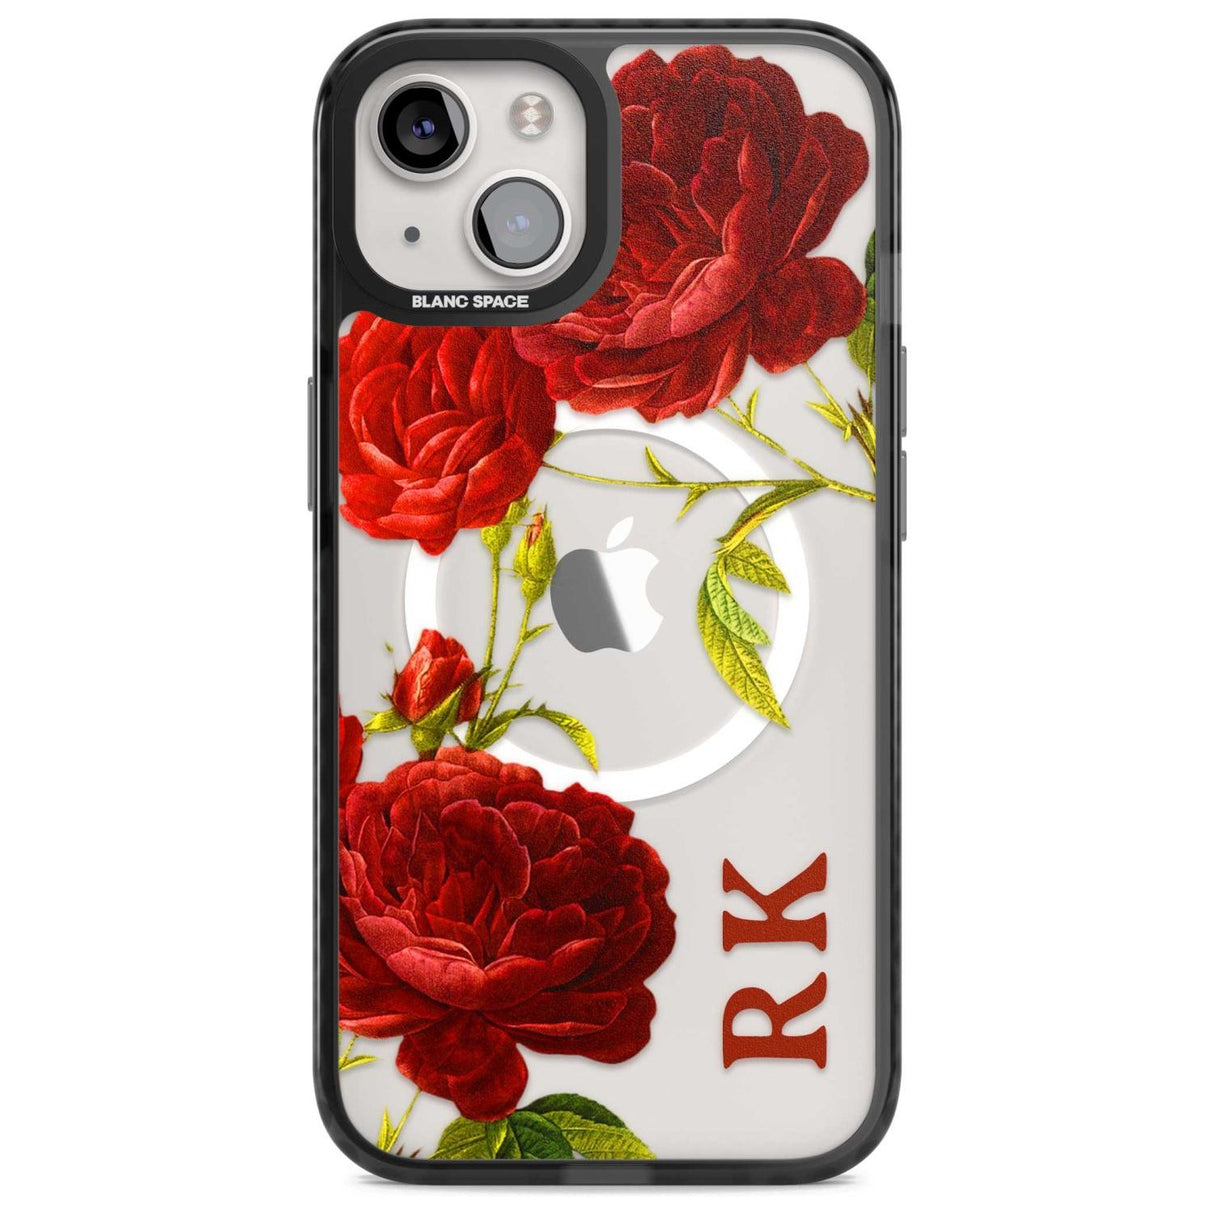 Personalised Clear Vintage Floral Red Roses Custom Phone Case iPhone 15 Plus / Magsafe Black Impact Case,iPhone 15 / Magsafe Black Impact Case,iPhone 14 Plus / Magsafe Black Impact Case,iPhone 14 / Magsafe Black Impact Case,iPhone 13 / Magsafe Black Impact Case Blanc Space